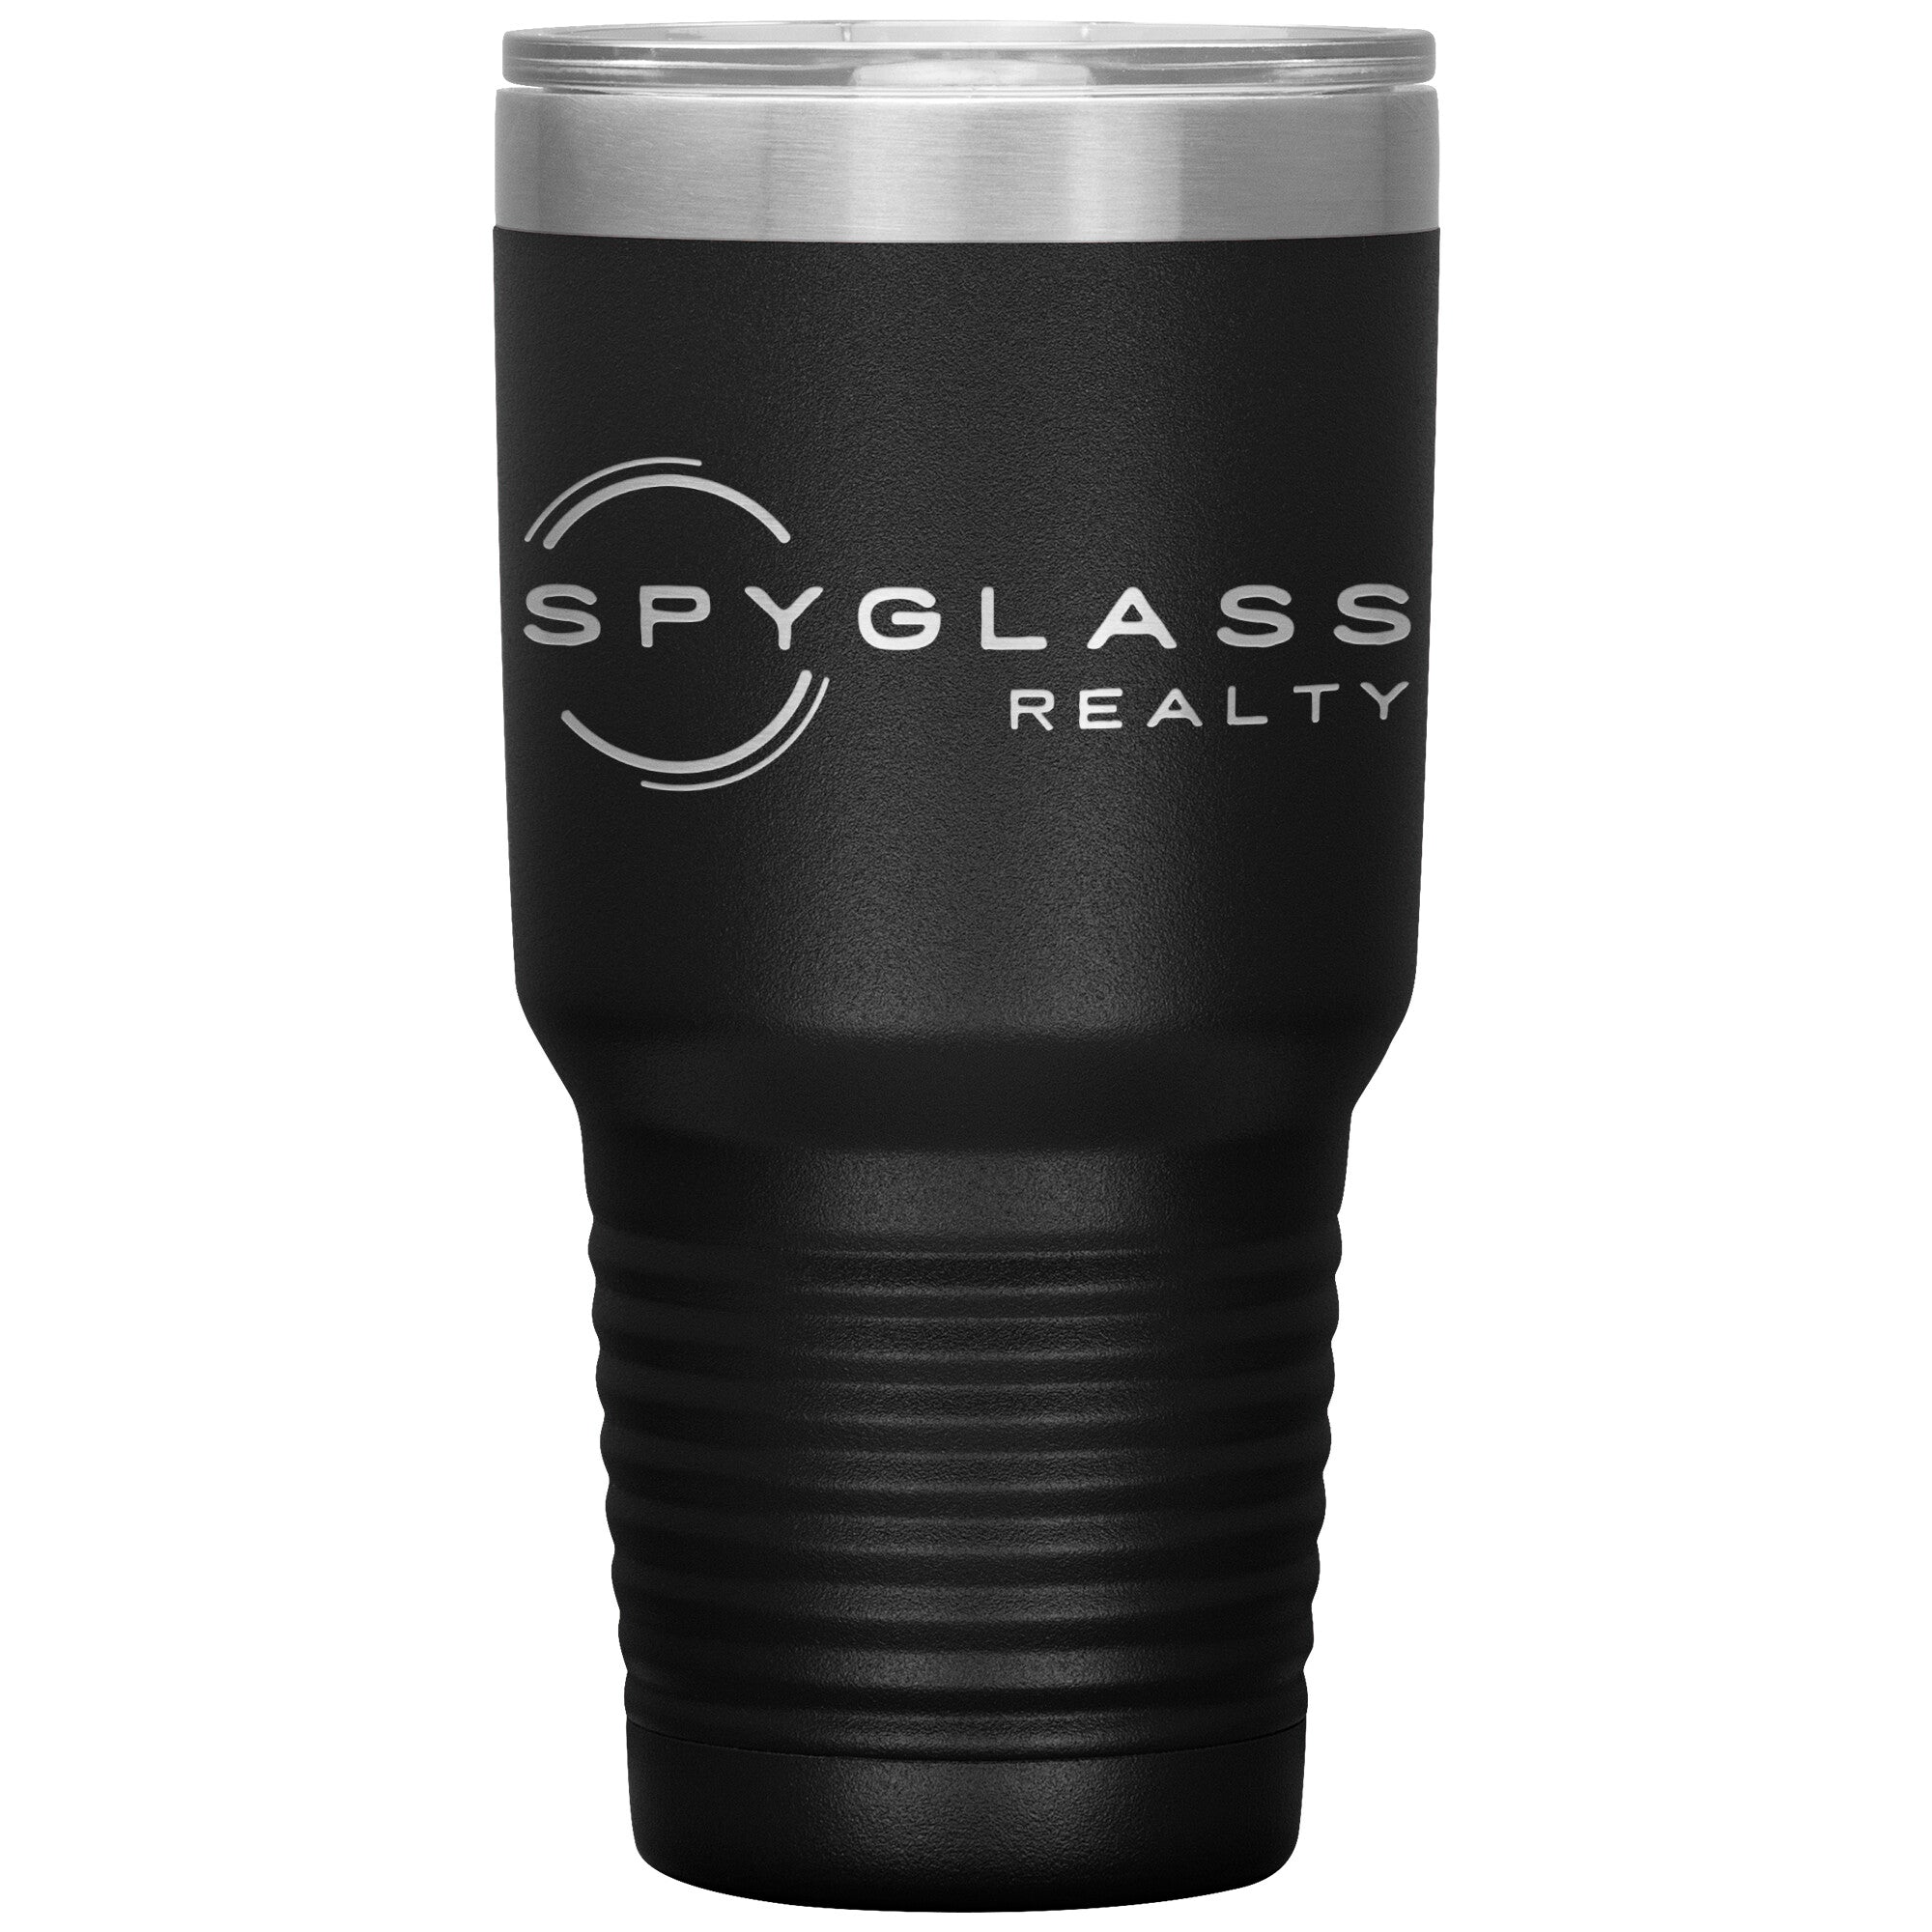 30oz Spyglass Realty Insulated Tumbler